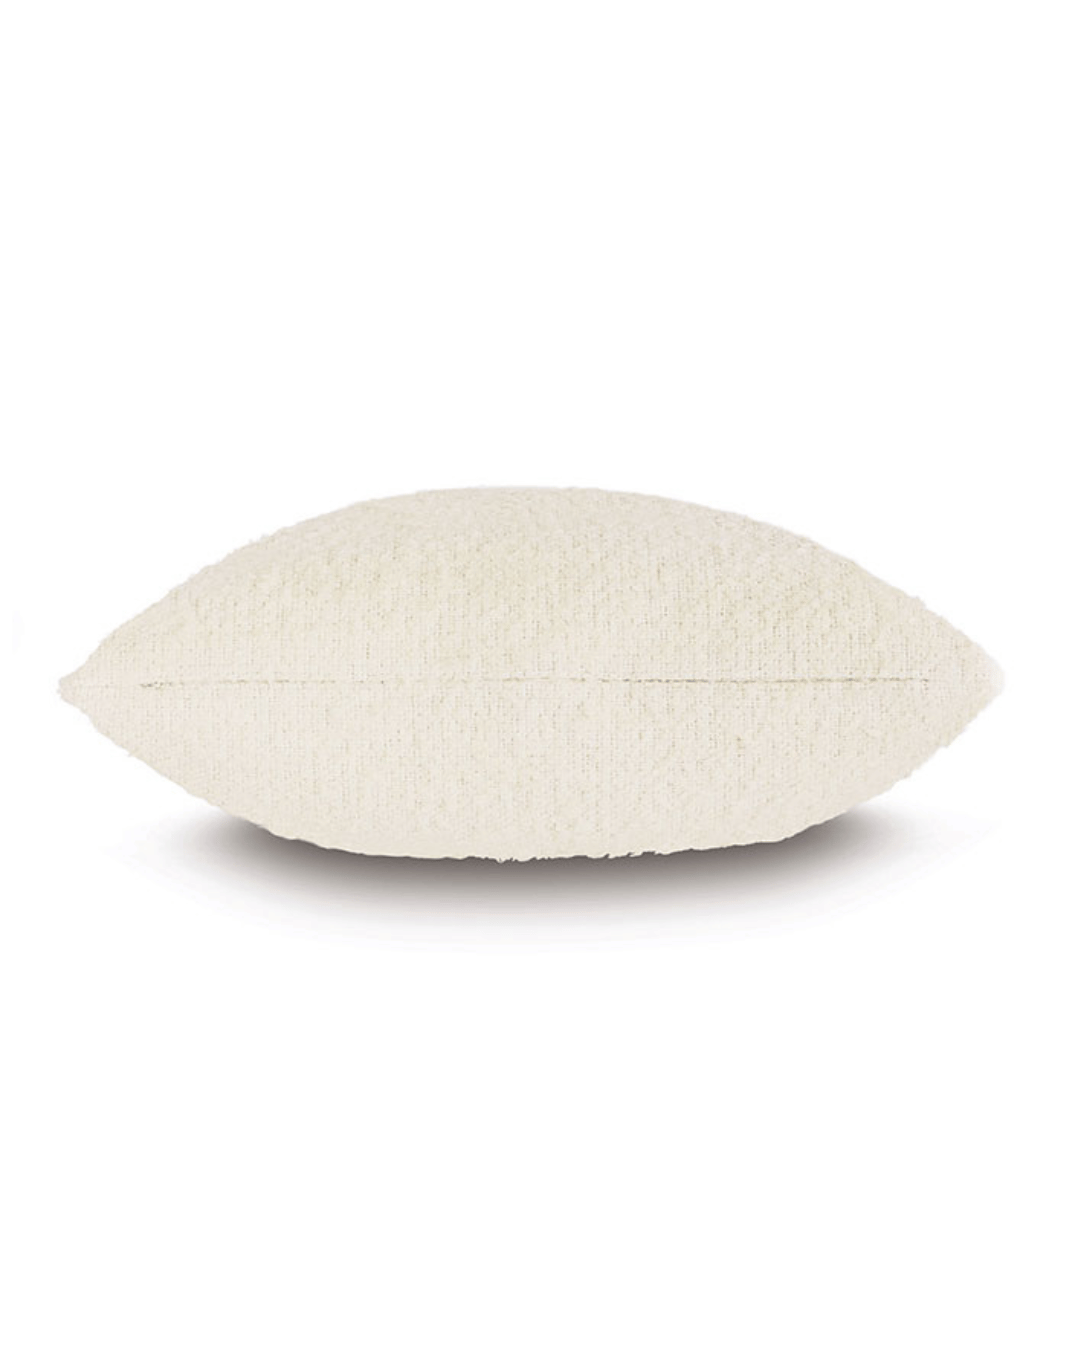 A single Mar Cream Pillow with a rough texture, shaped like a long oval, displayed against a plain white background in a Scottsdale Arizona bungalow by Eastern Accents.